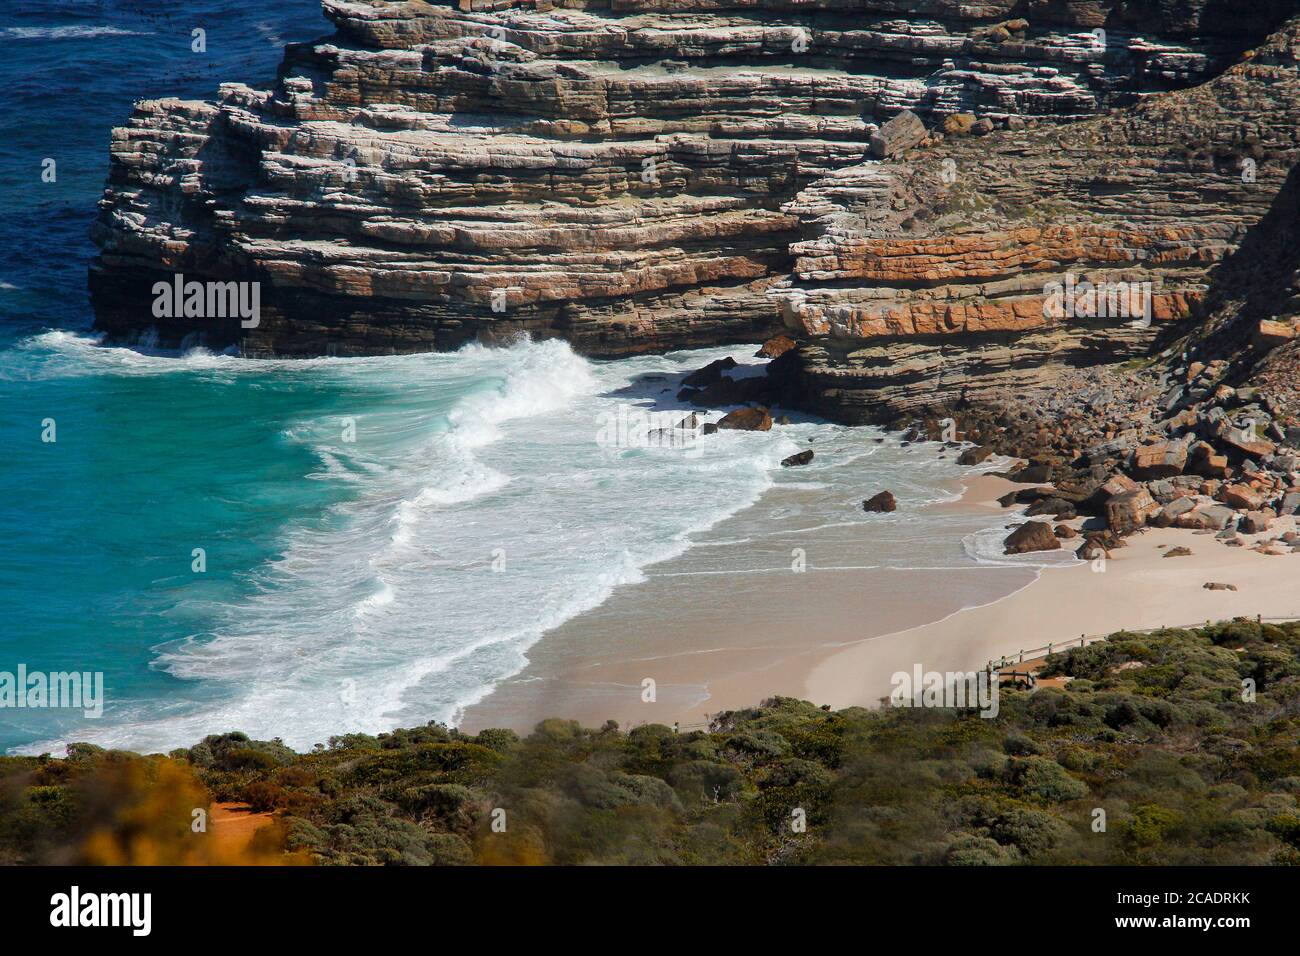 Disa Beach in the Cape Point National Park. The beach is accessed via a stairway from the parking area above. The rugged rocks are an iconic feature. Stock Photo